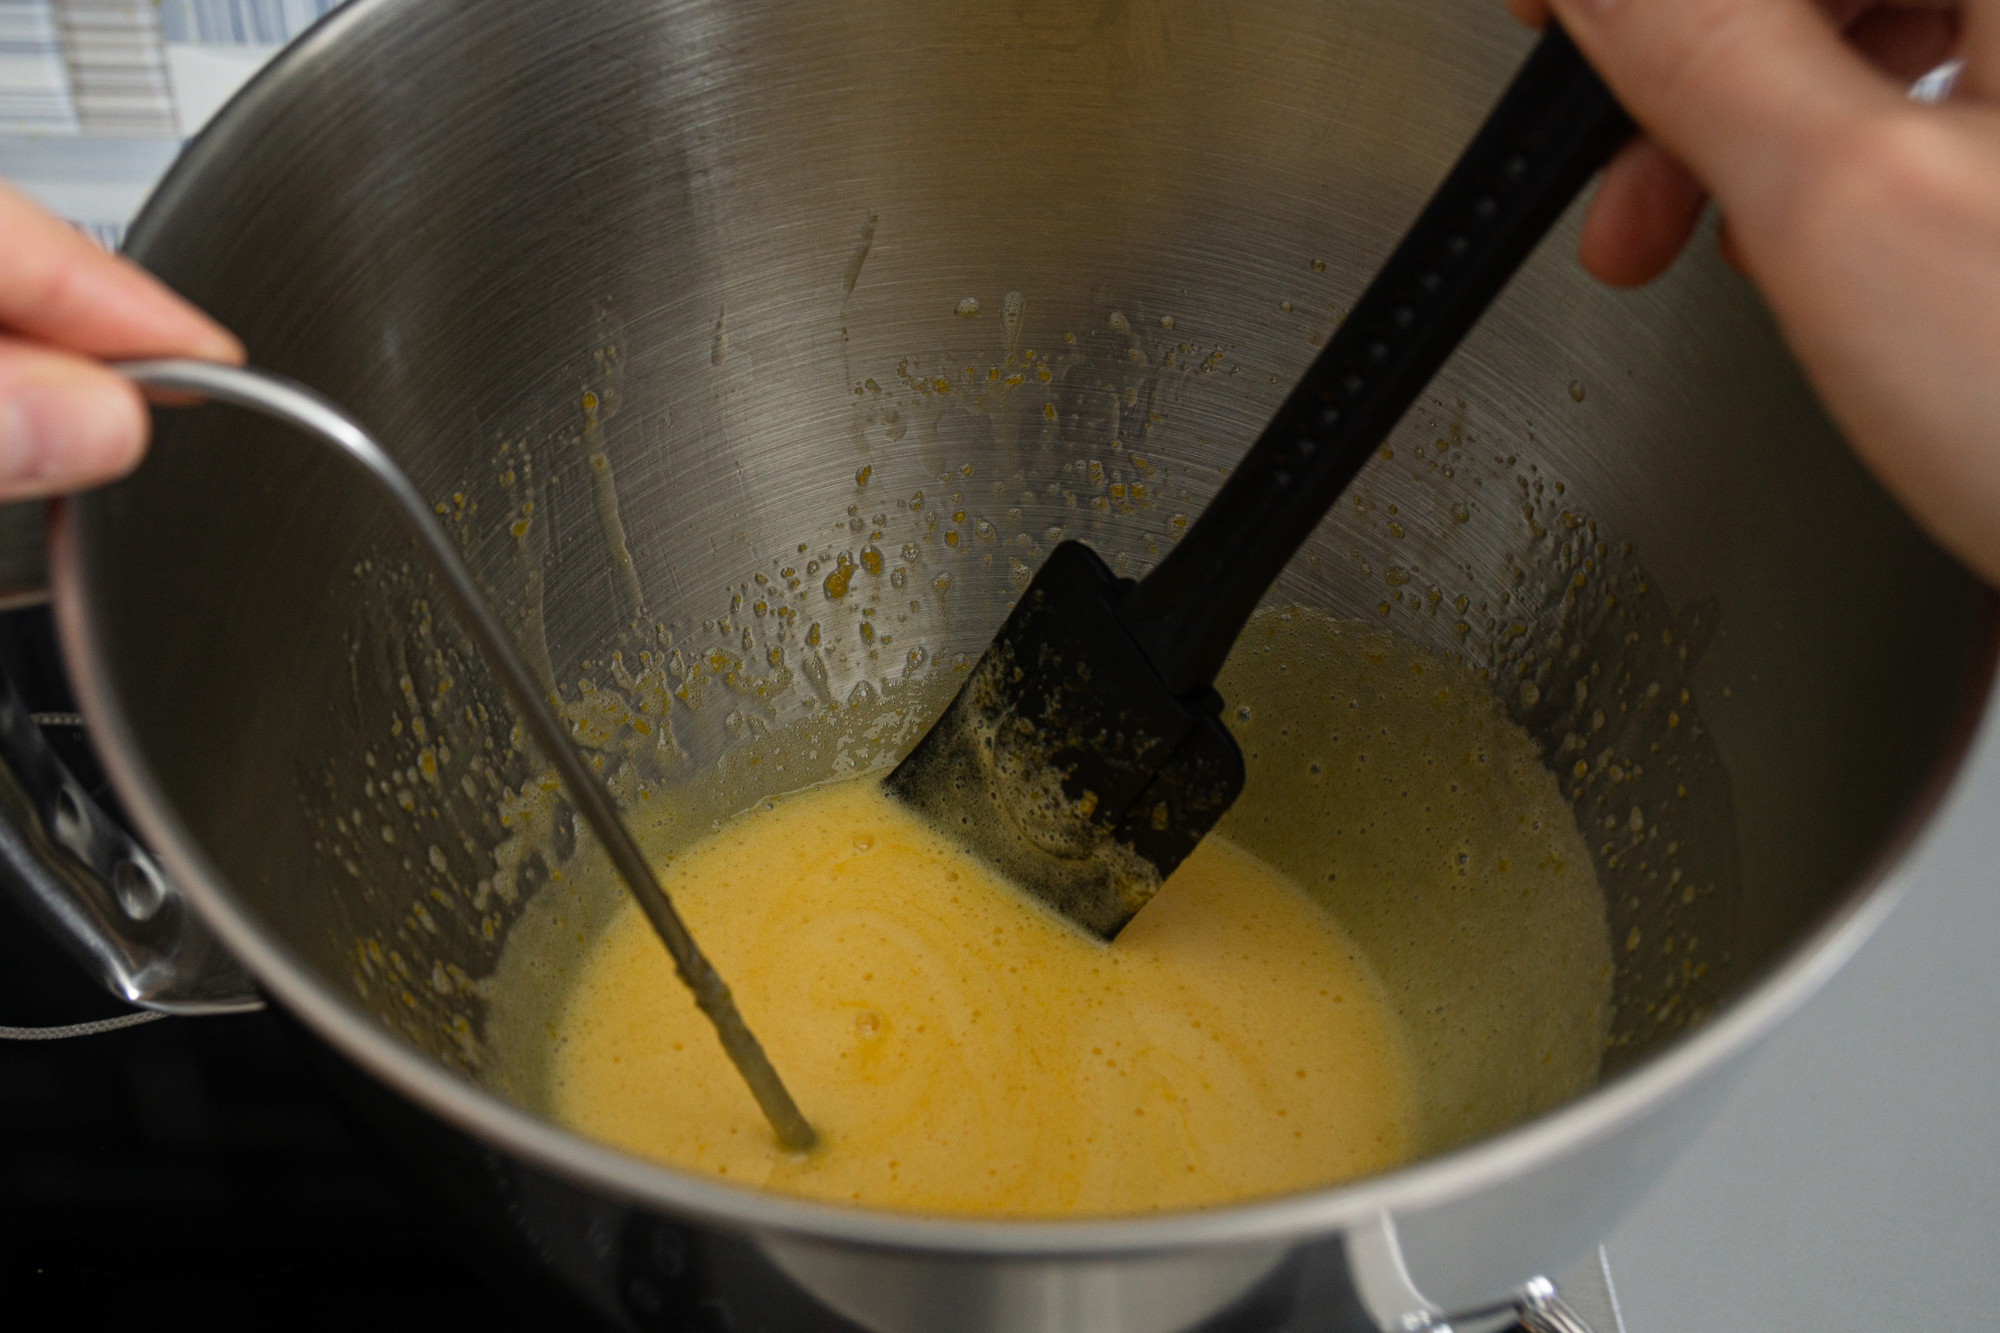 Heating and mixing egg yolks with sugar